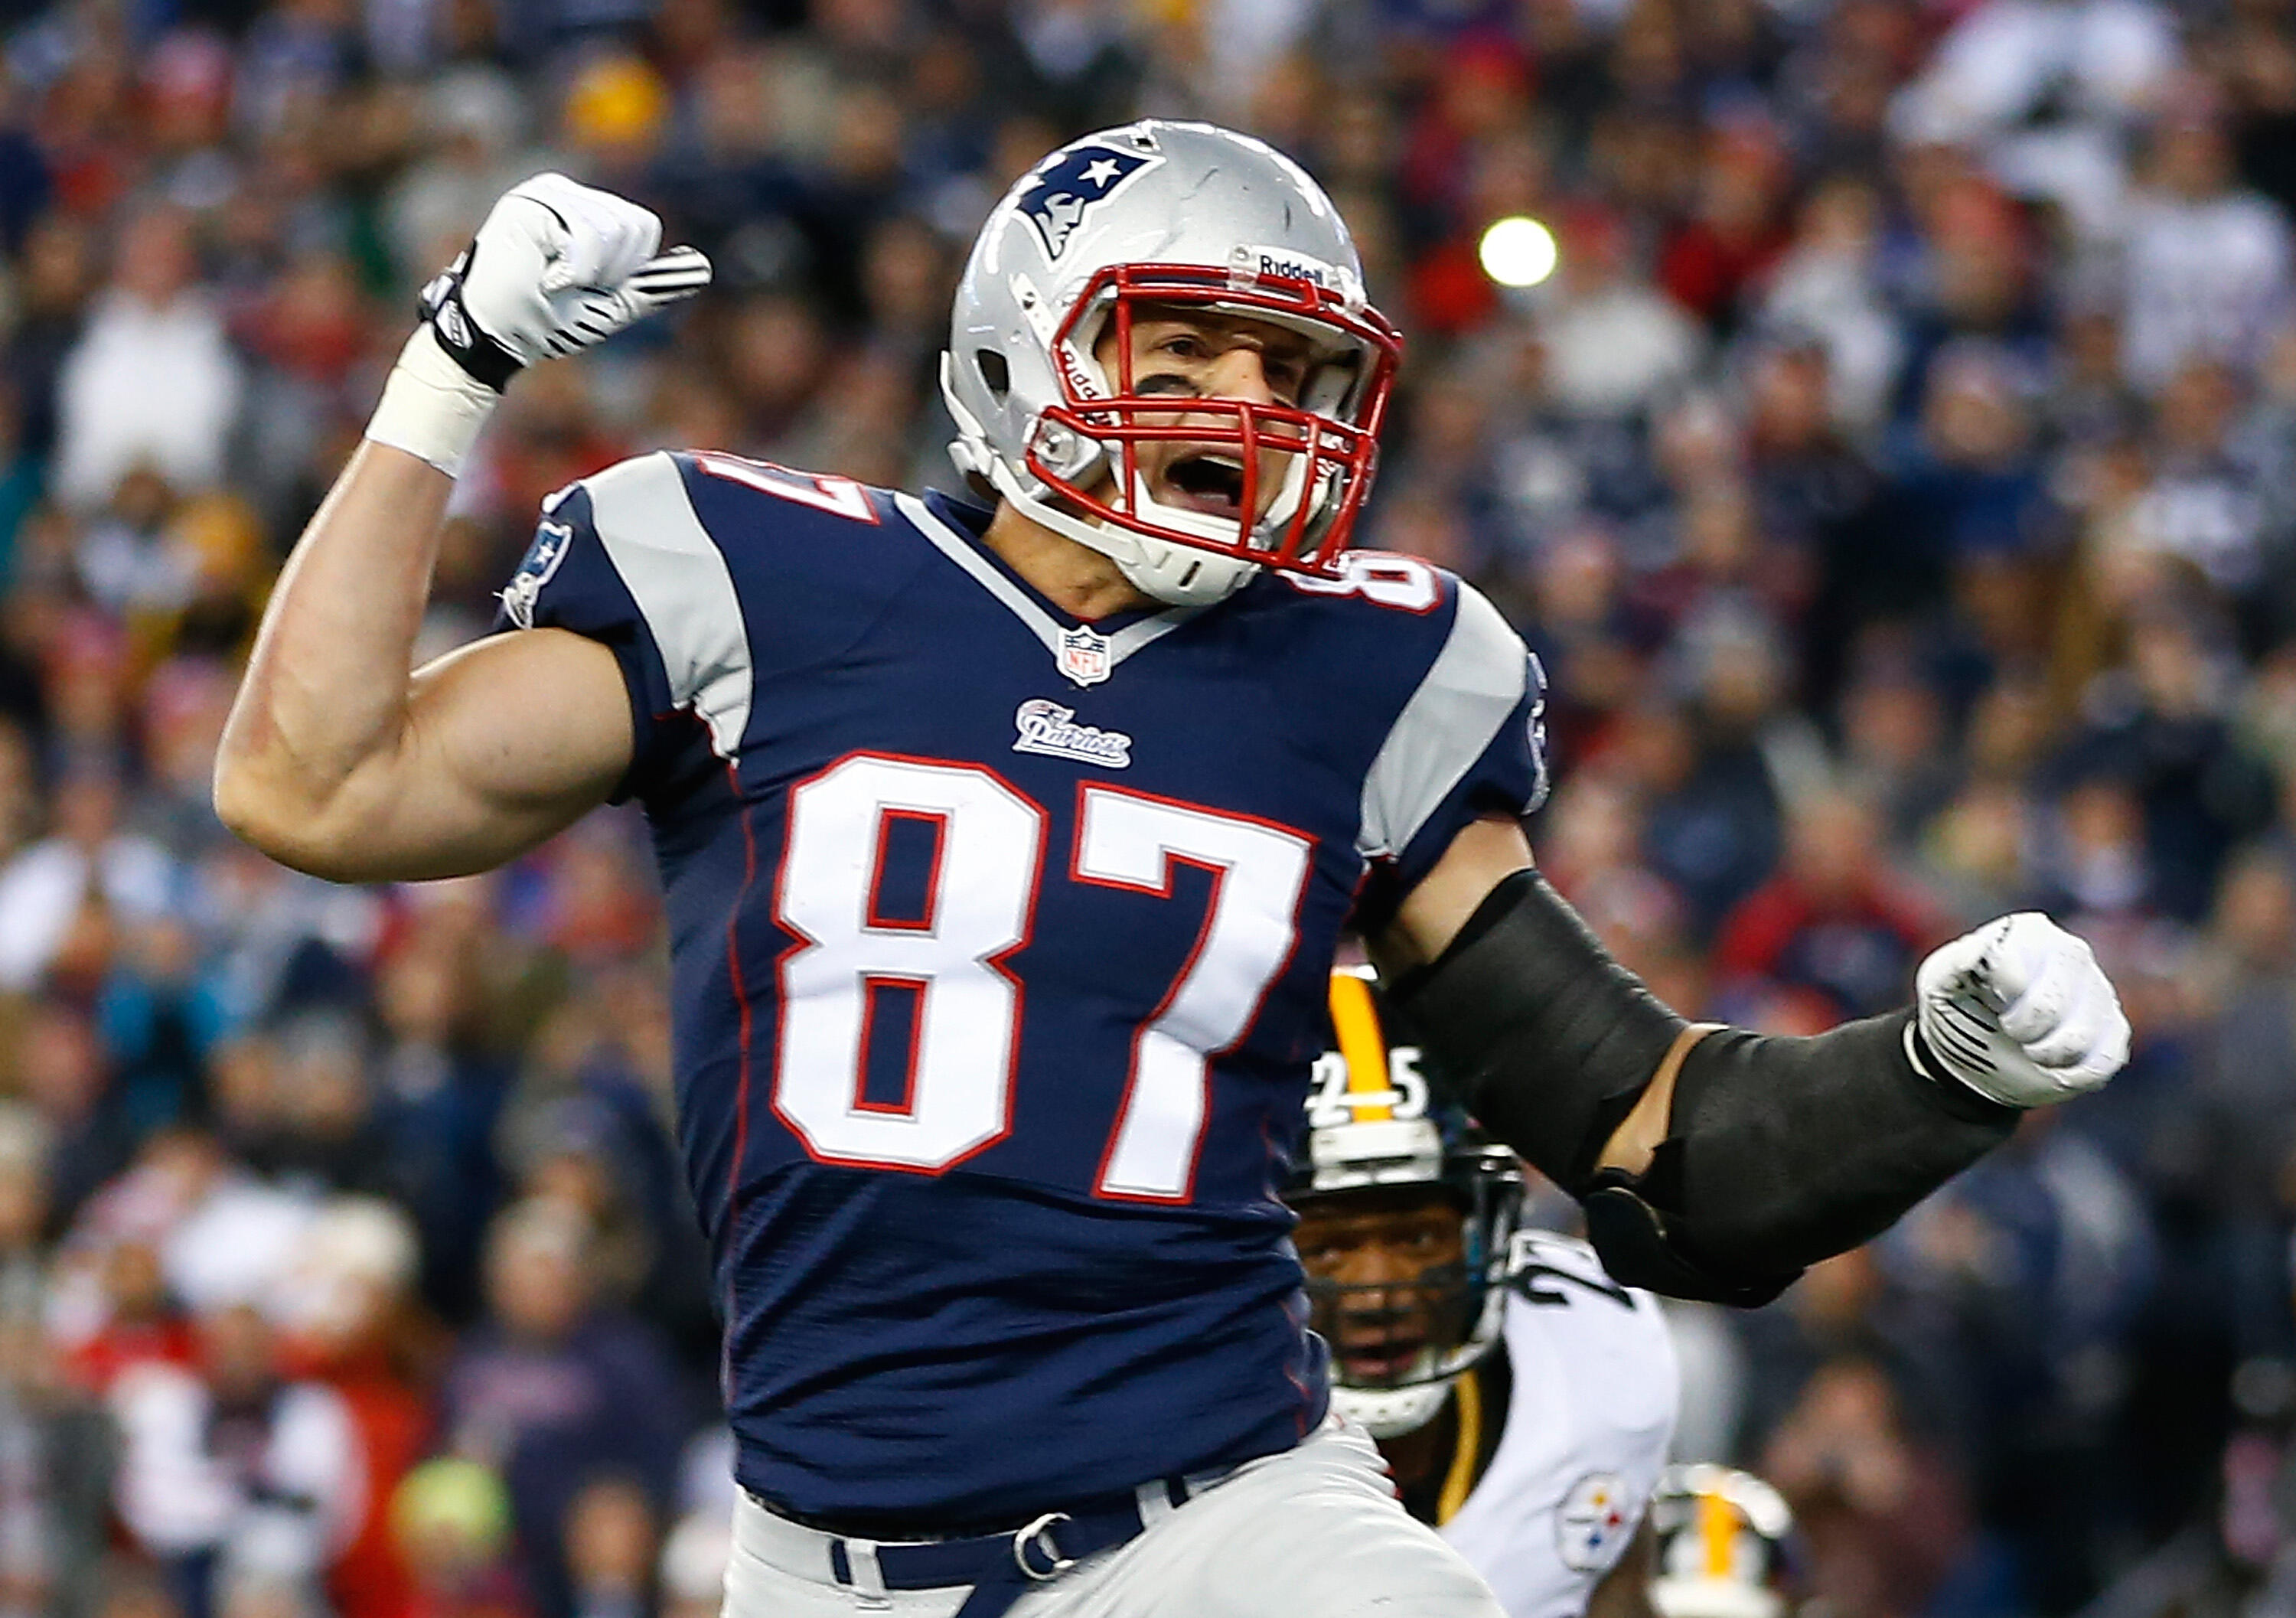 FOXBORO, MA - NOVEMBER 03:  Rob Gronkowski #87 of the New England Patriots reacts after a teammate missed a touchdown pass against the Pittsburgh Steelers in the first quarter at Gillette Stadium on November 3, 2013 in Foxboro, Massachusetts.  (Photo by J